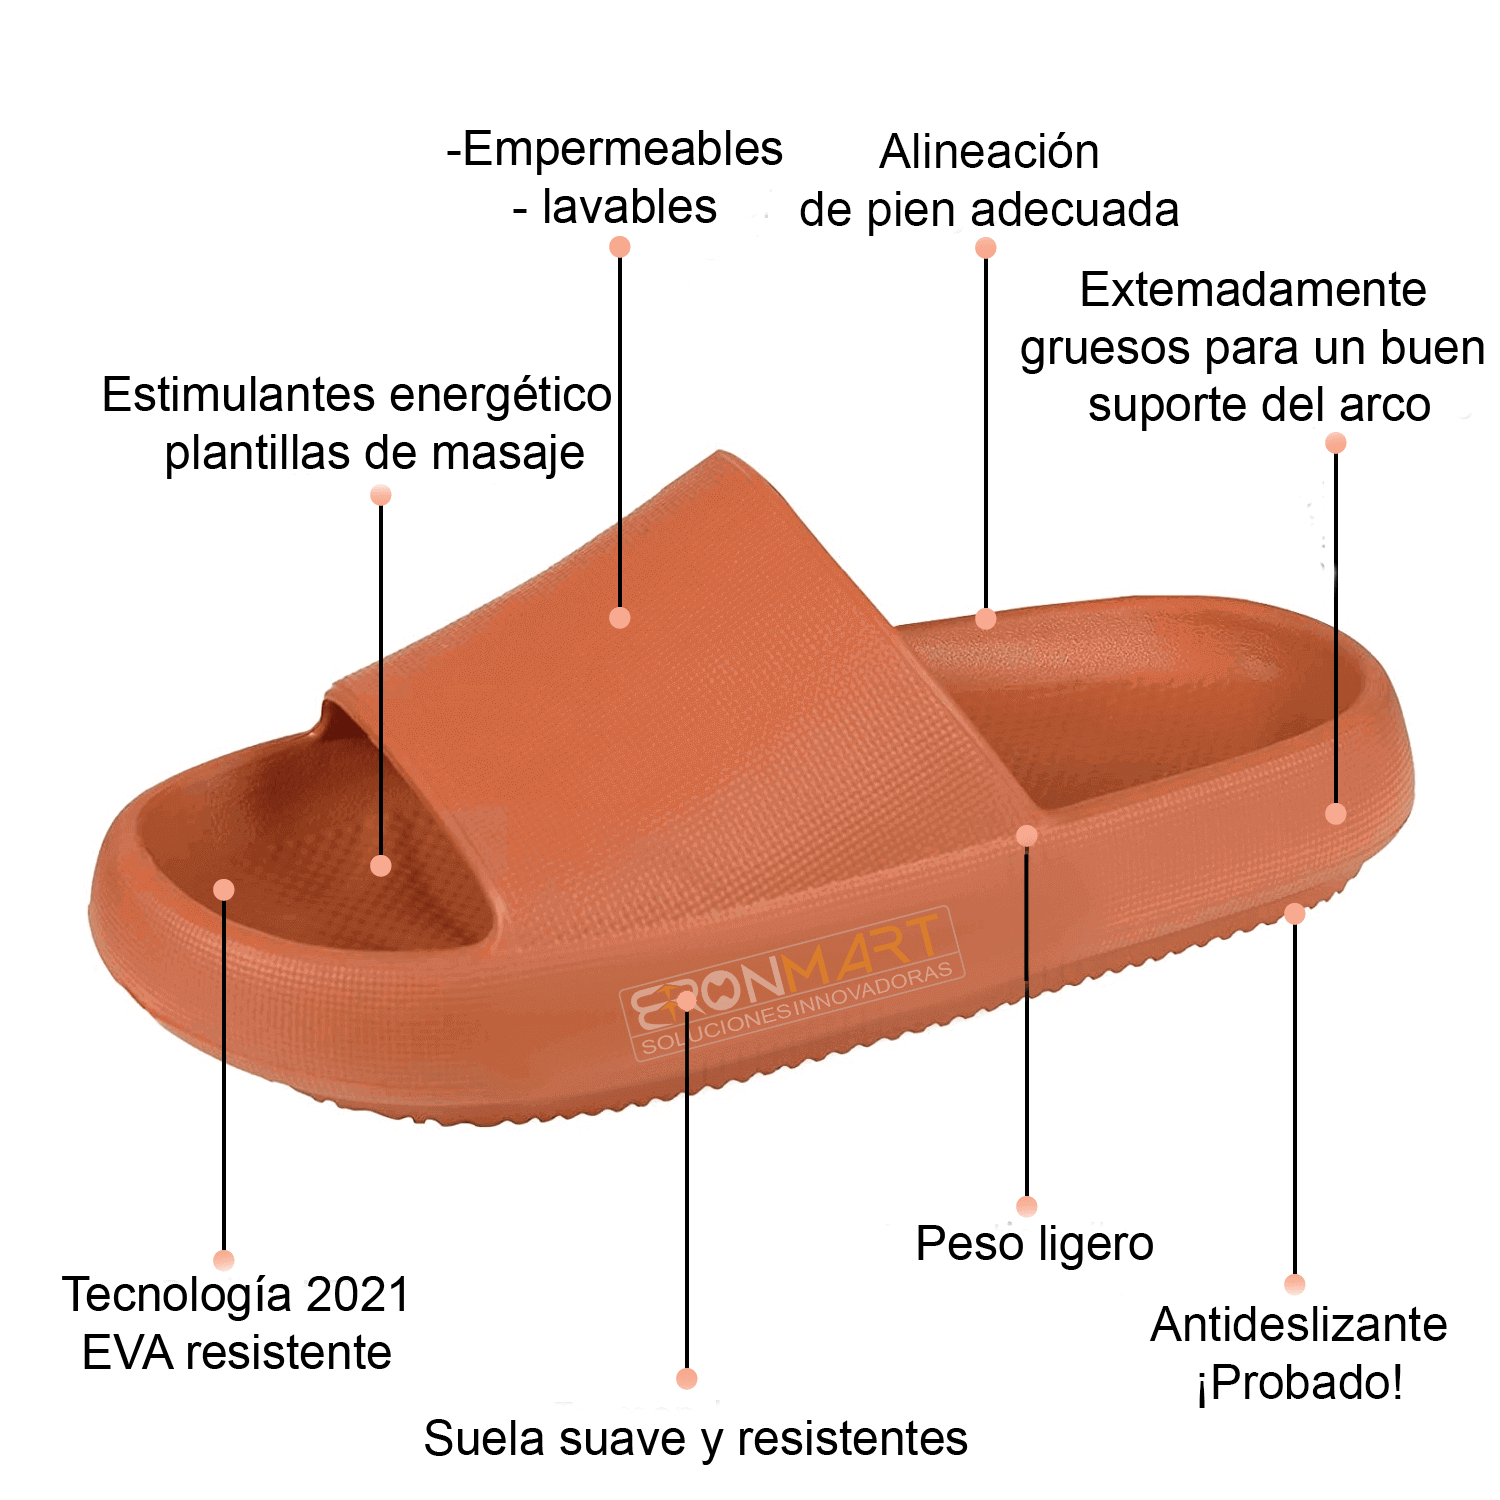 Where to buy flip flops, where to buy cheap flip flops, where to buy Havaian flip flops, where to buy Ipanema flip flops, where they sell flip flops in the center, where to throw flip flops, where to buy crocs, where to buy flip flops, where to buy flip flops What is called flip flops, why is it said flip flops, because Jorge Fields uses flip flops, remove_circle_outline, why are the flip flops, why sandals, which flip flops, which flip flops using jorge fields, which flip flops are fashionable, which flip flops , what flip flops, which flip flops, colored flip flops, flip flops,